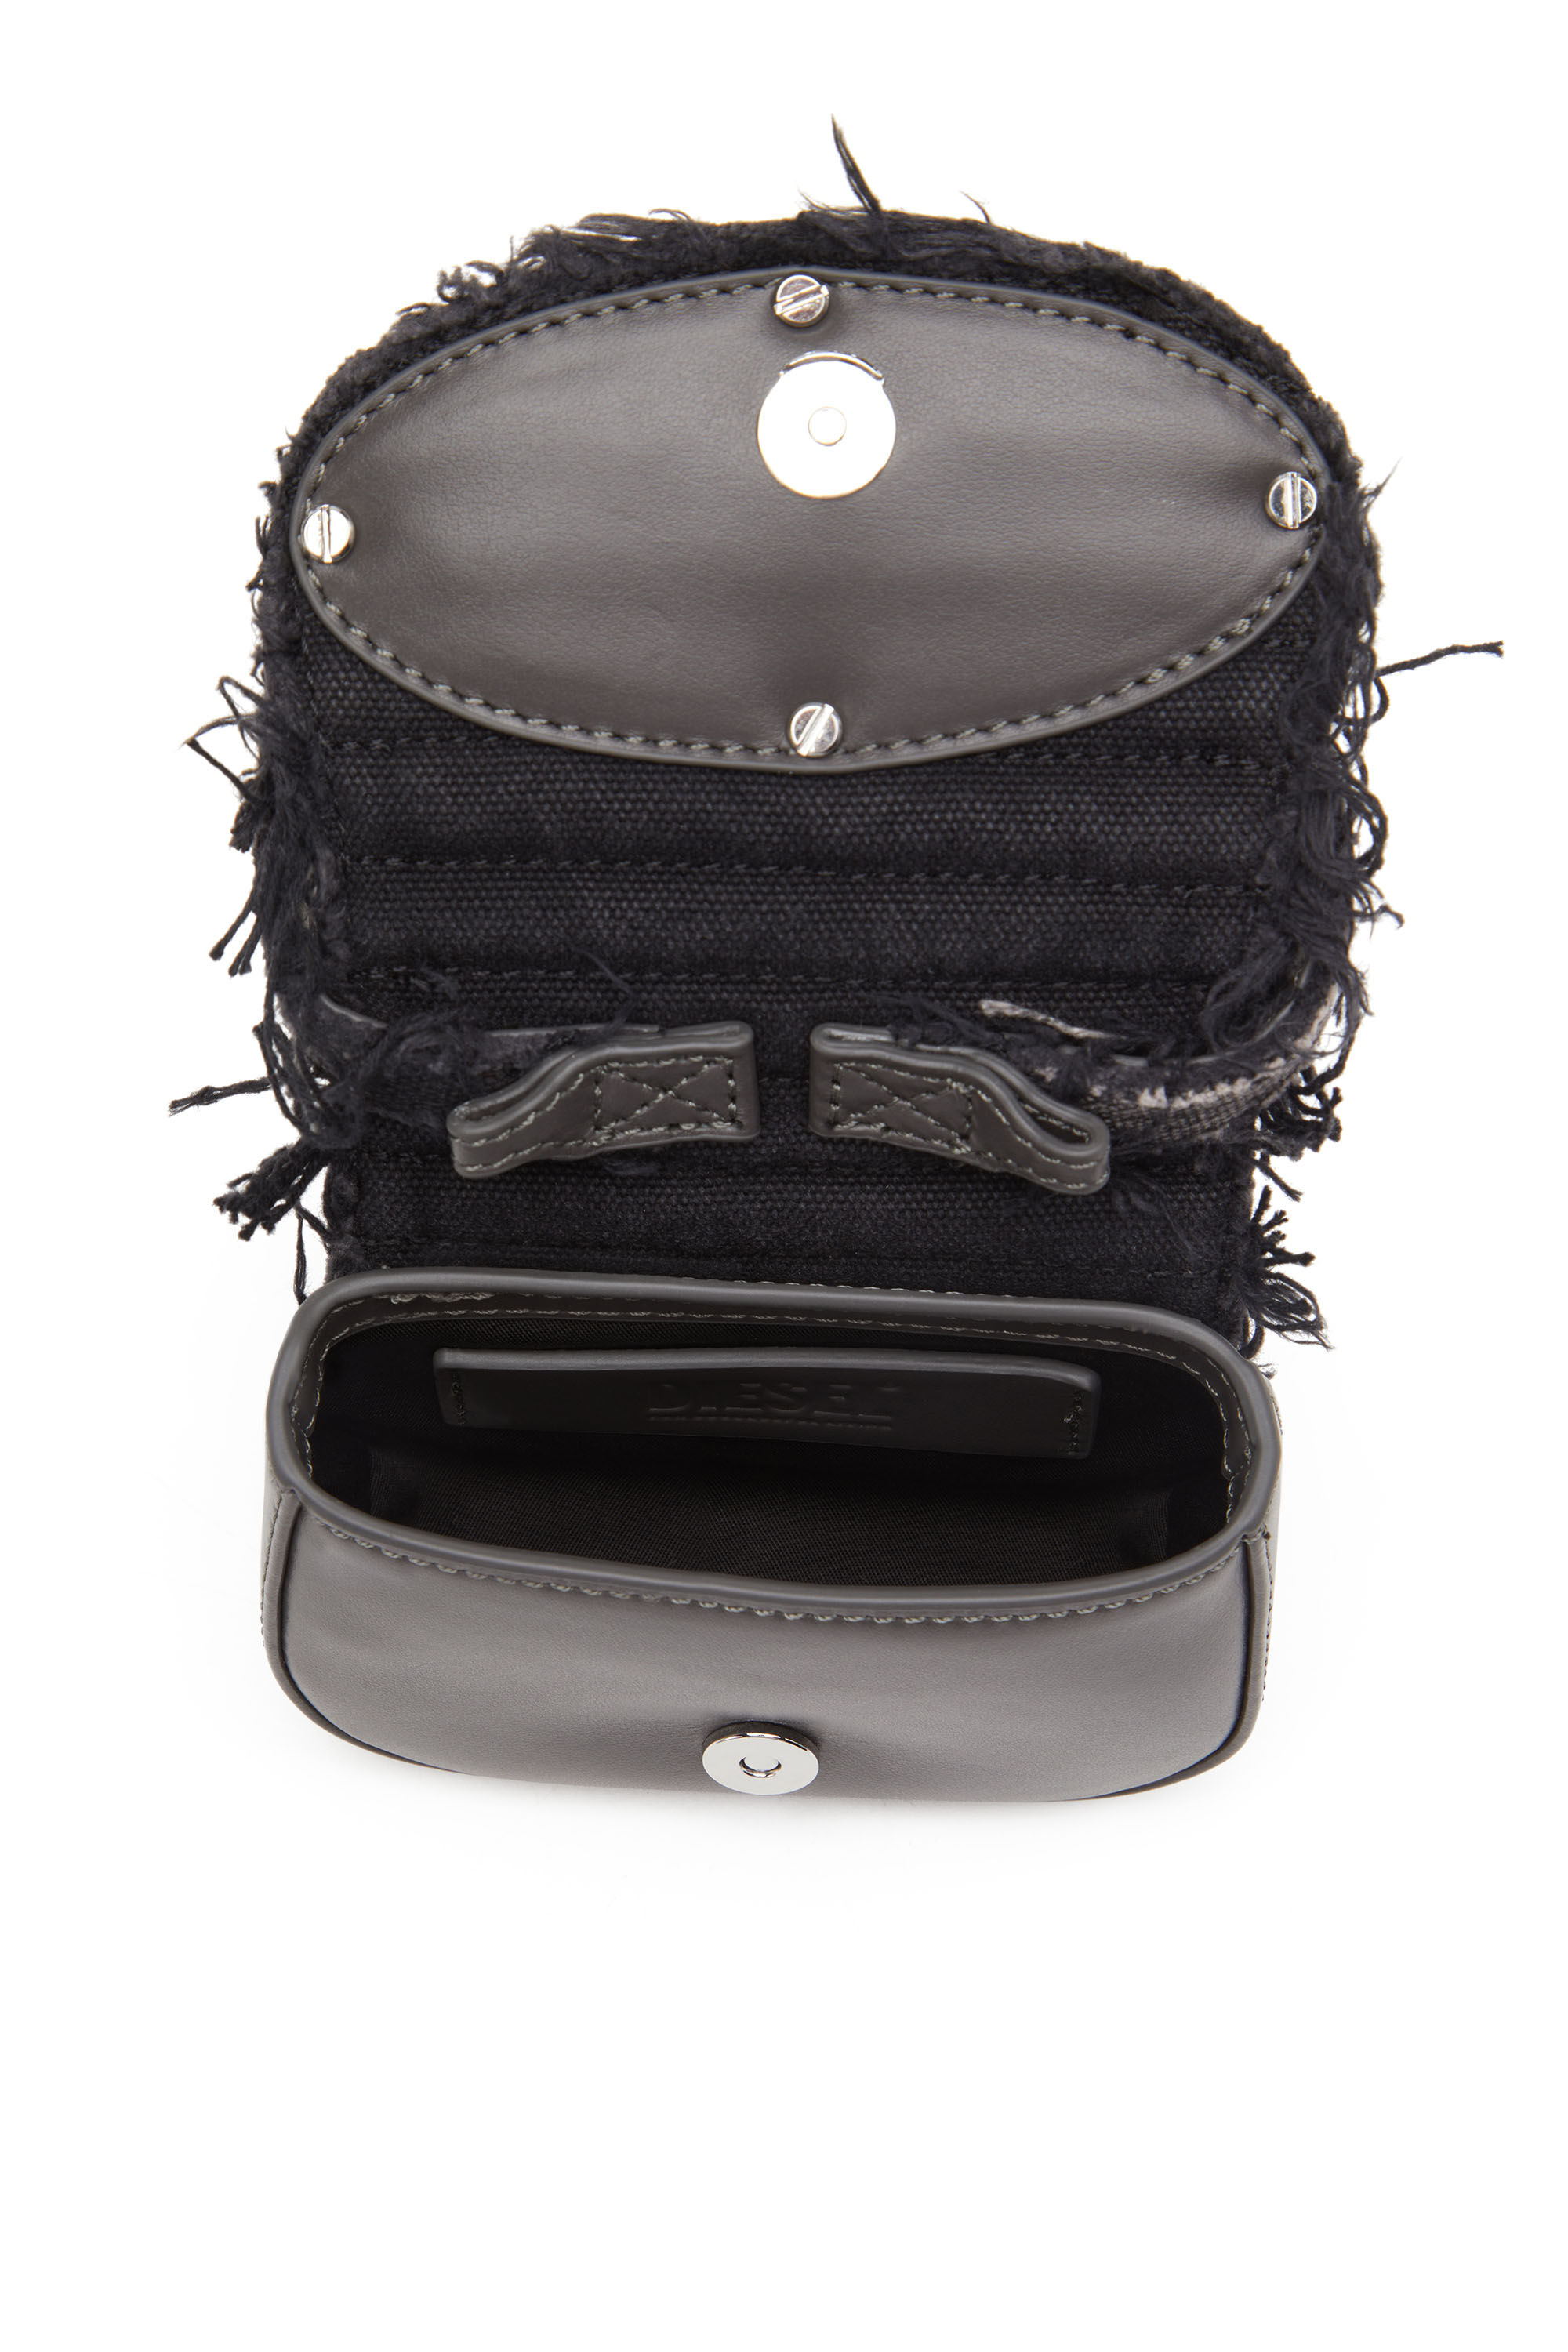 Diesel - 1DR XS, Woman 1DR XS - Iconic mini bag in canvas and crystals in Black - Image 5